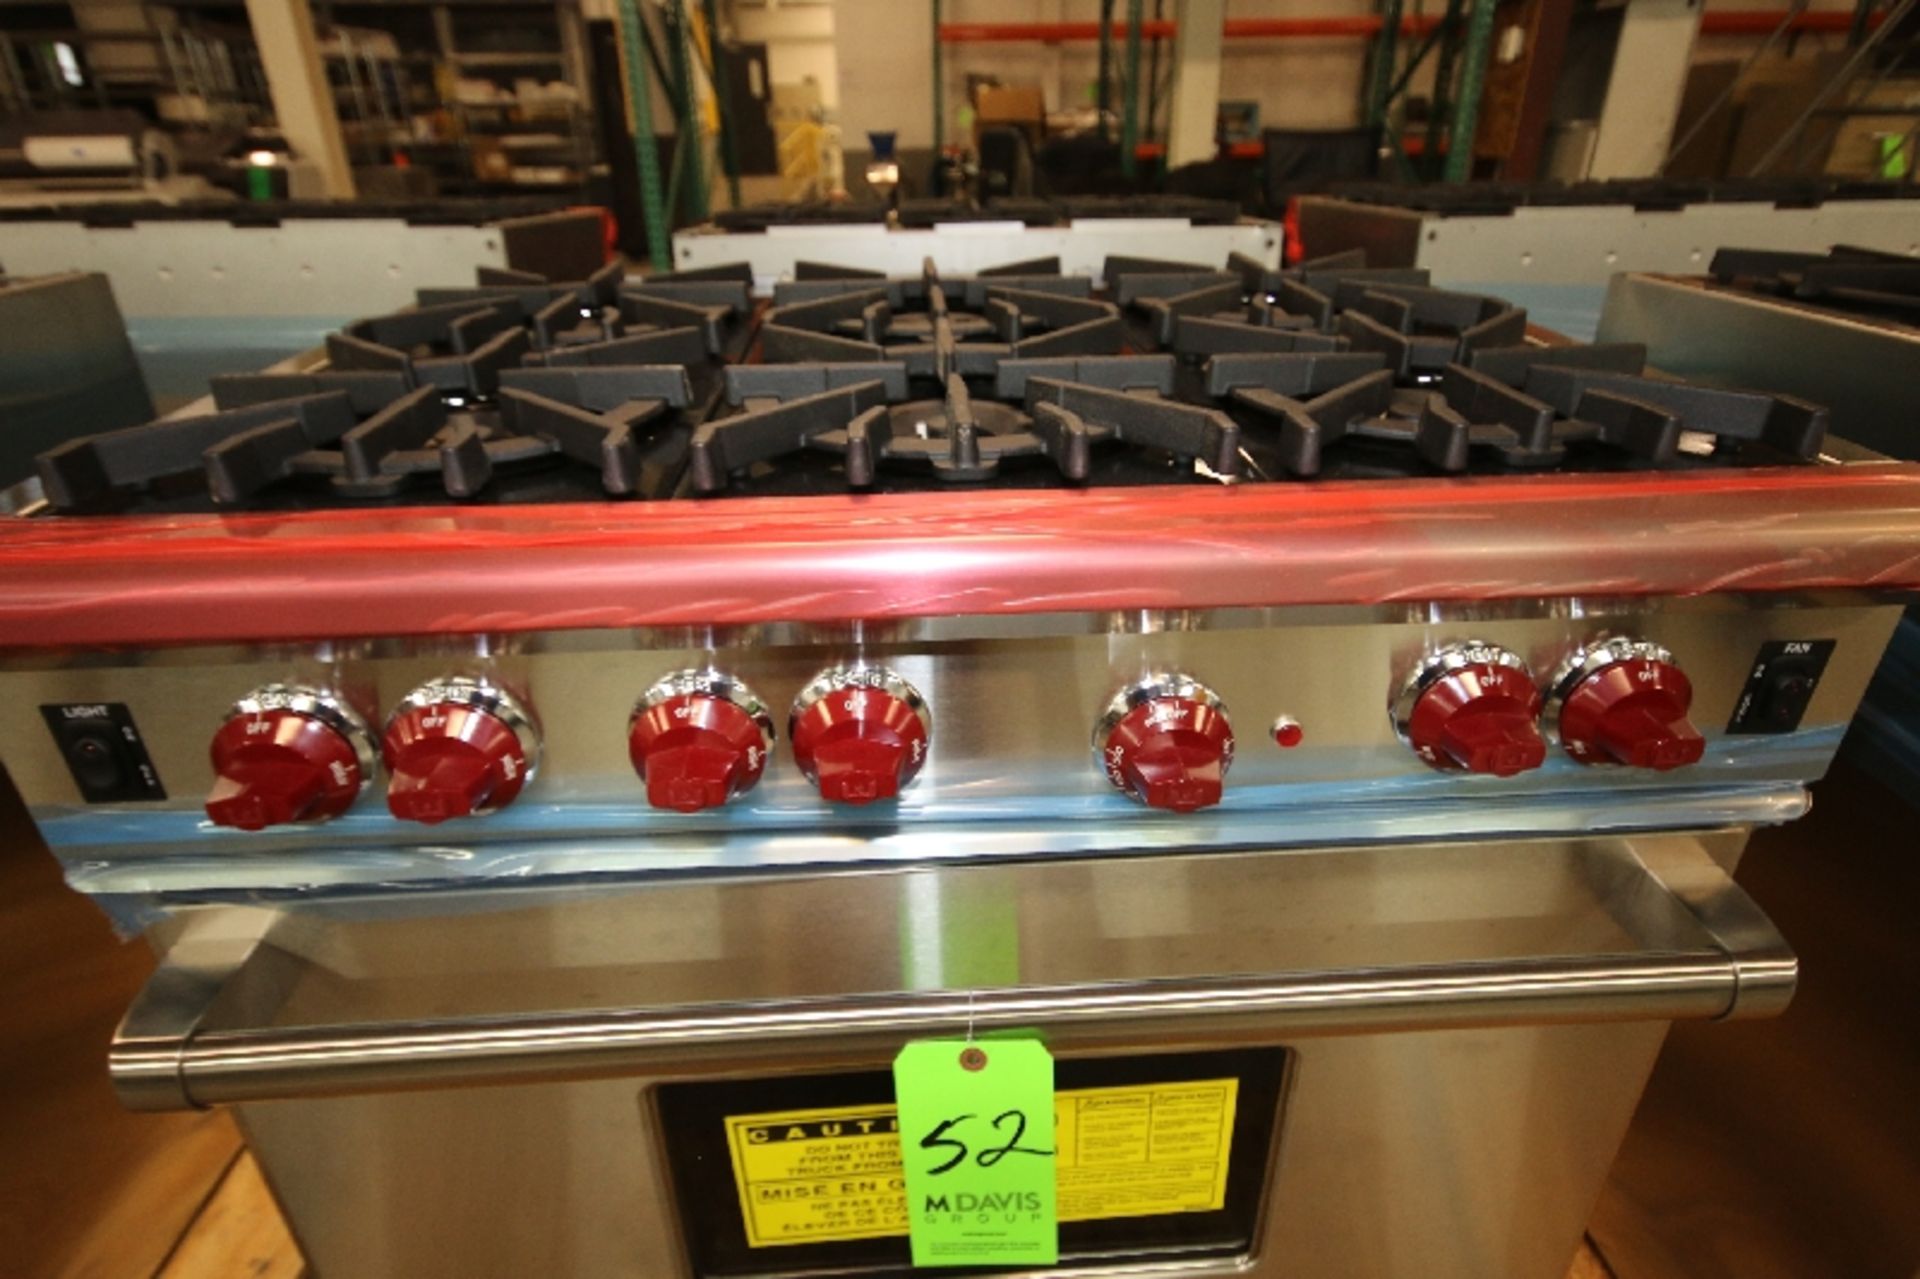 New Wolf 36" Professional Natural Gas Range Oven/6-Burner, Model R366, S/N 17225041 with S/S Finish - Image 3 of 4